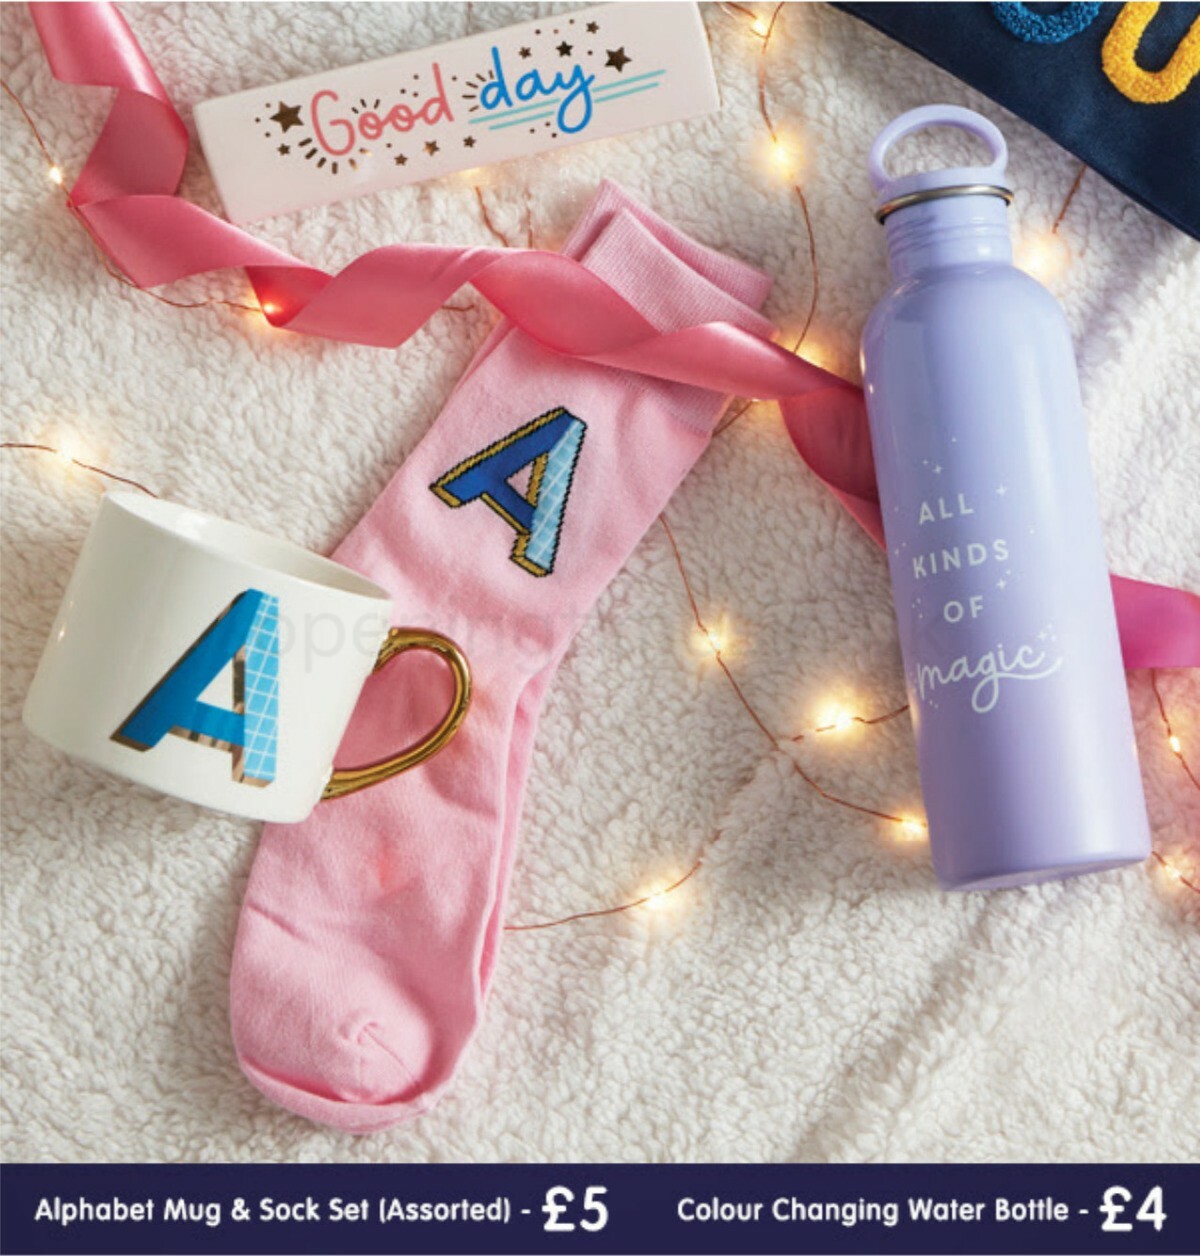 B&M Most Wanted Christmas Gifts Offers from 18 December